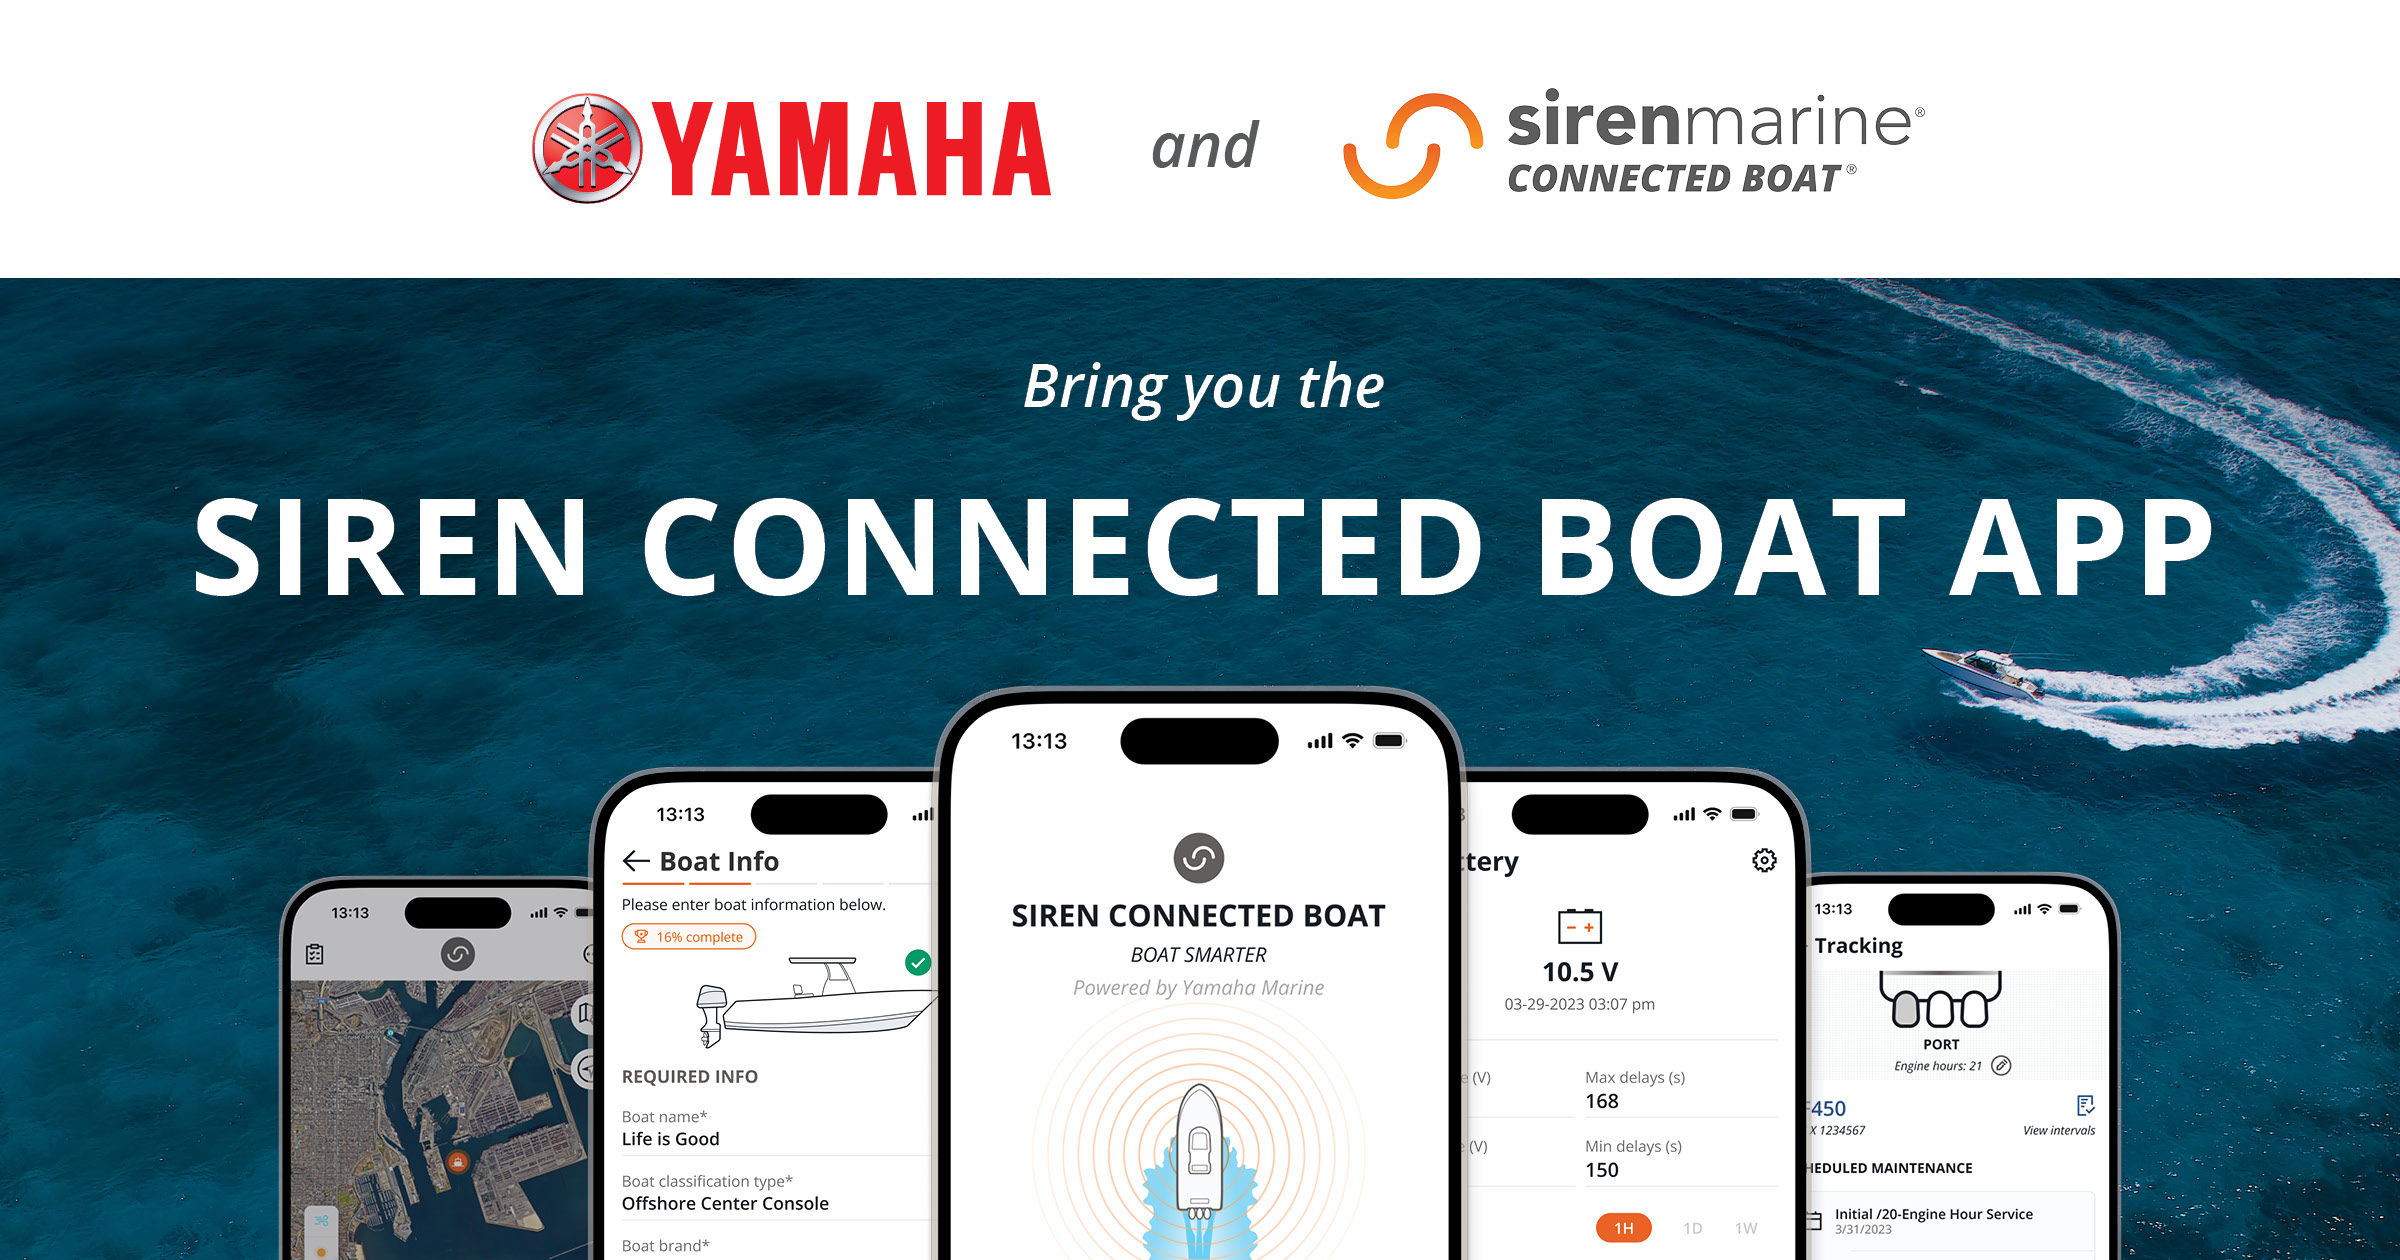 Yamaha Motor Canada and Siren Marine are expanding the connected boat experience within the Canadian market. Dealers and boat builders in Canada can now use the industry’s leading marine IoT (Internet of Things) experience for monitoring, tracking, controlling and providing maintenance information on the next generation of Connected Boats. (Graphic: Business Wire)